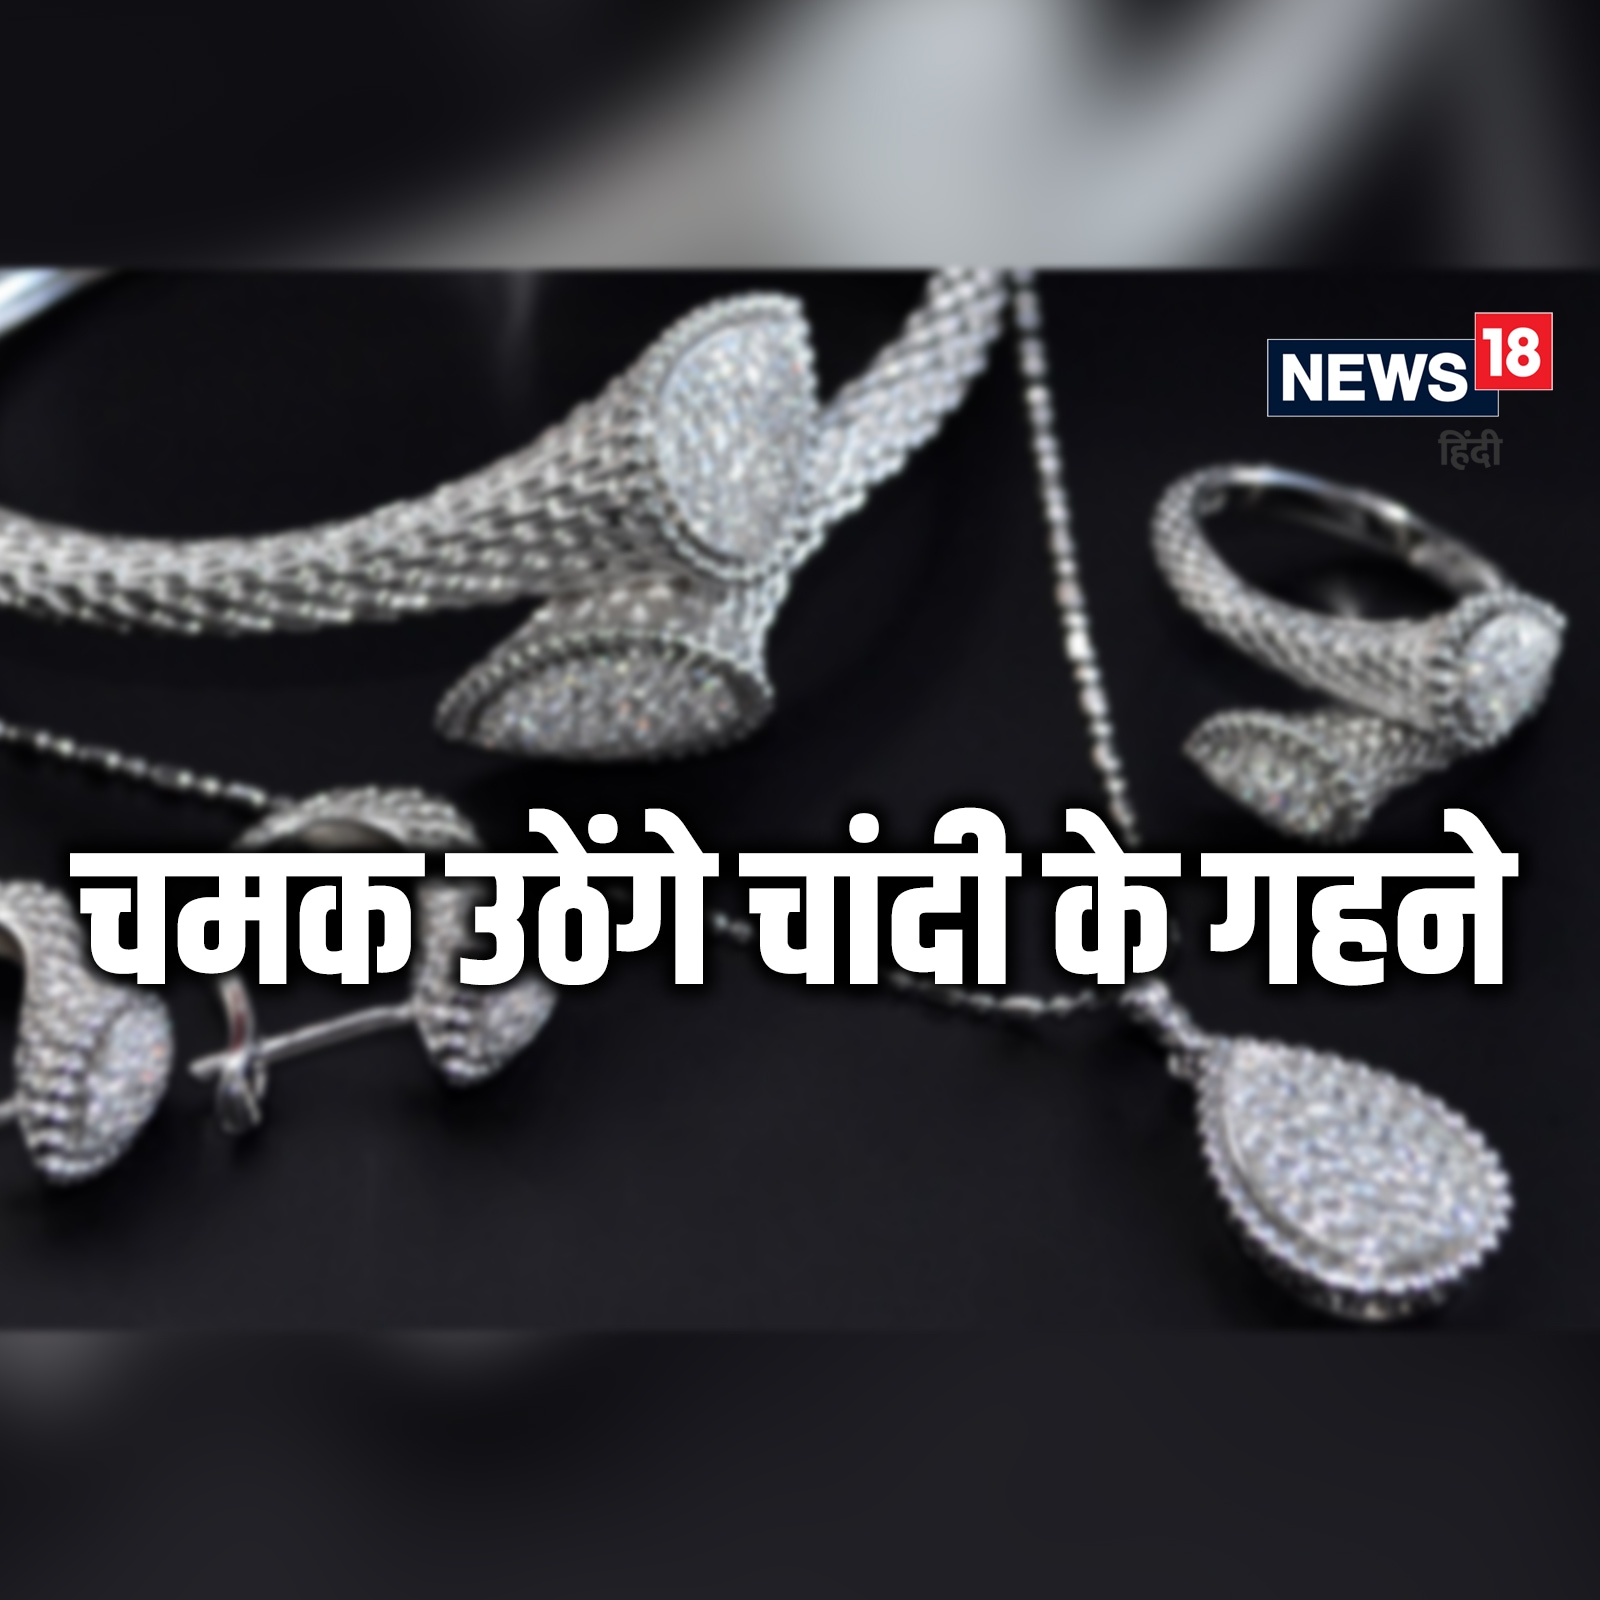 चद क परयग करत समय बरत य सवधनय  effects of wearing silver  and its precautions tpra  AajTak